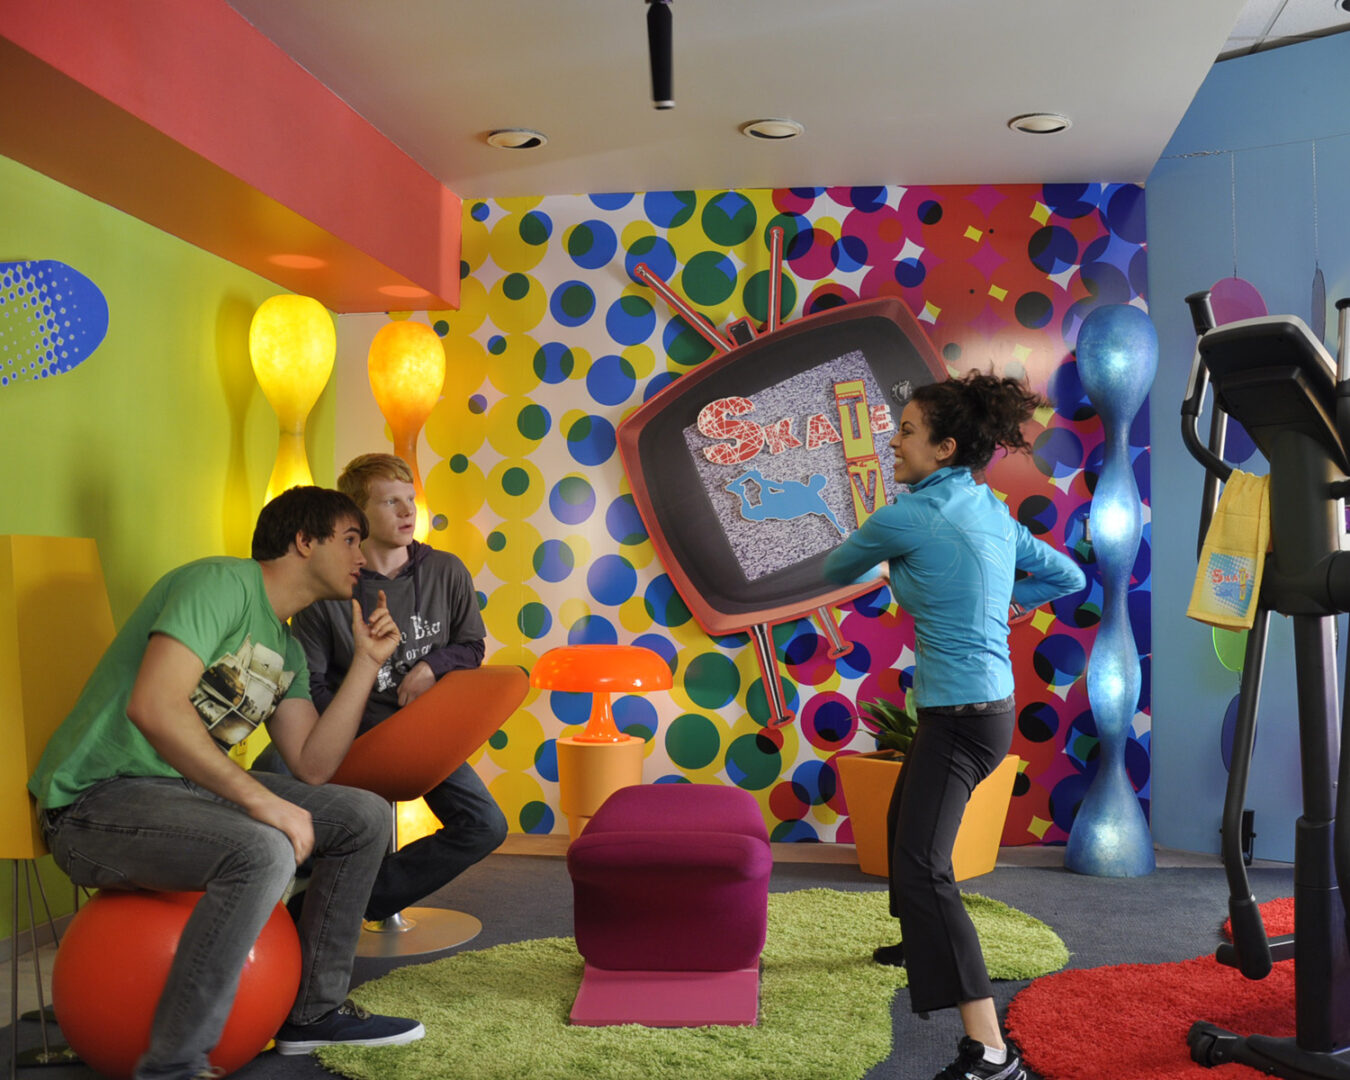 A dancing woman and two men in a colorful room